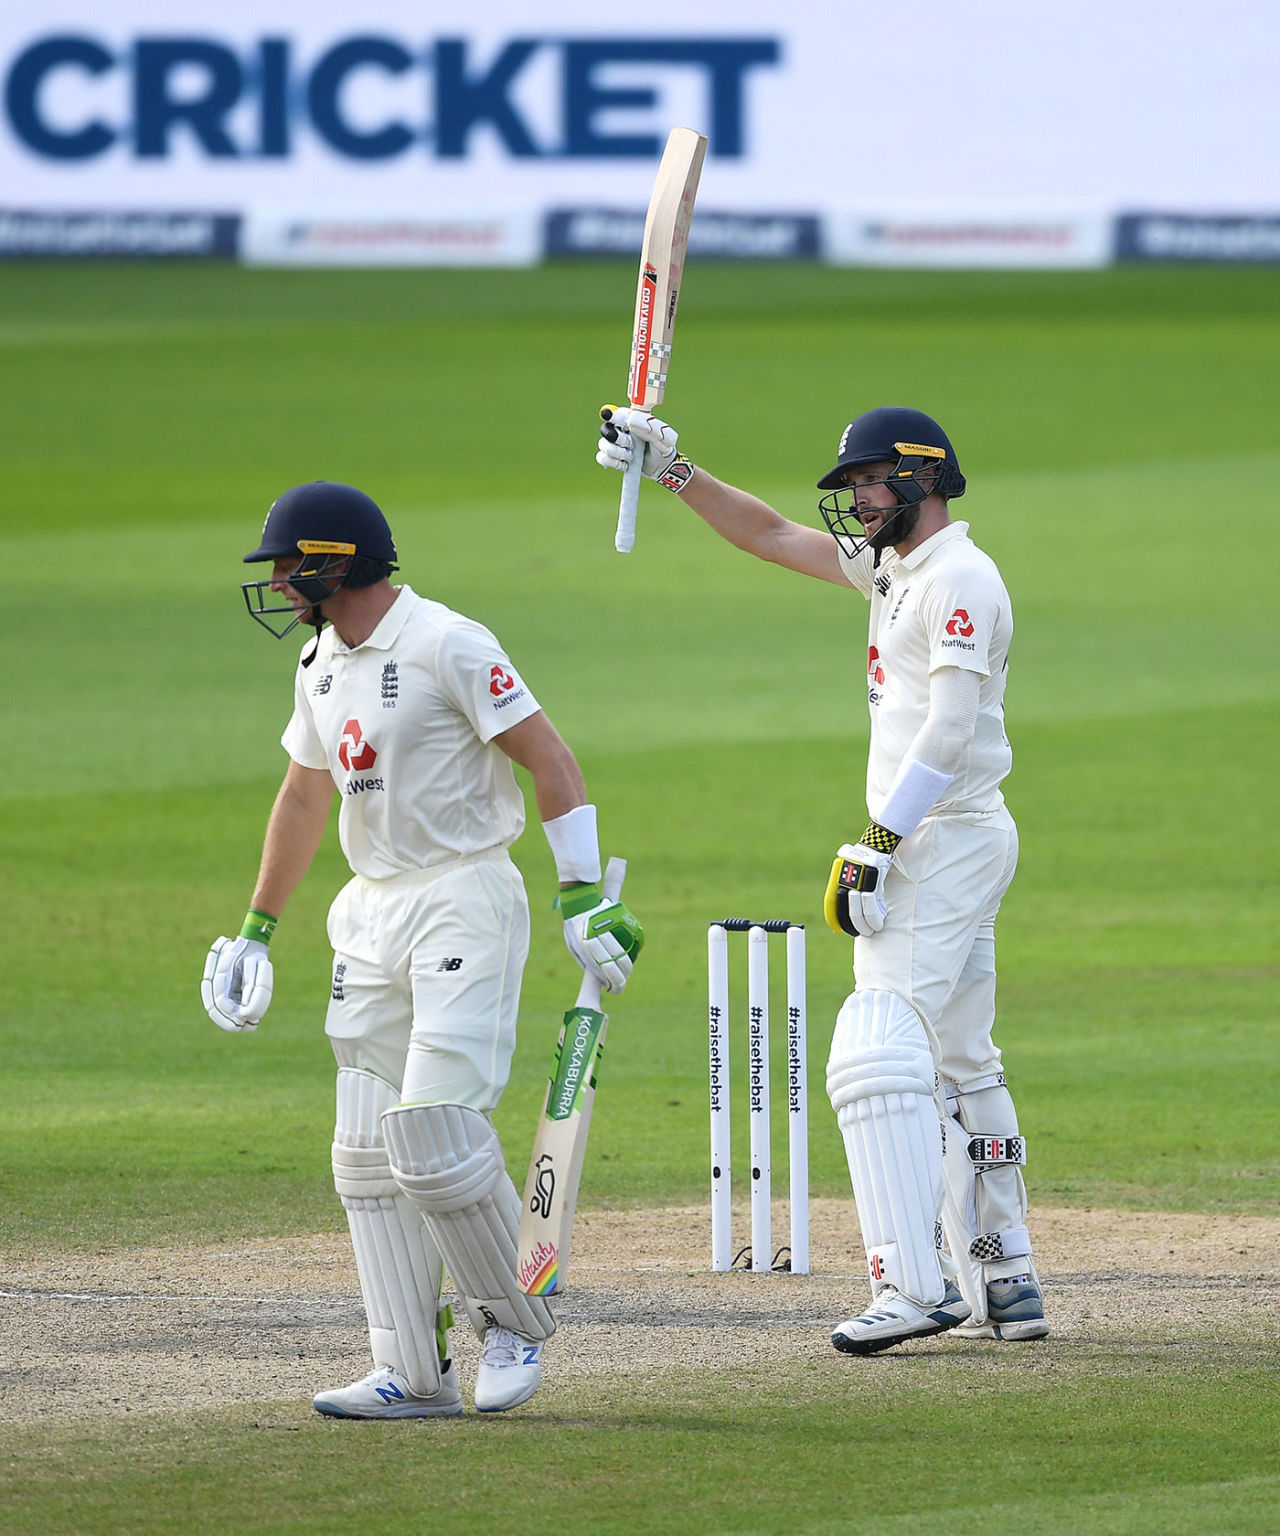 Chris Woakes reaches fifty in his stand with Jos Buttler, England v Pakistan, 1st Test, Old Trafford, 4th day, August 8, 2020